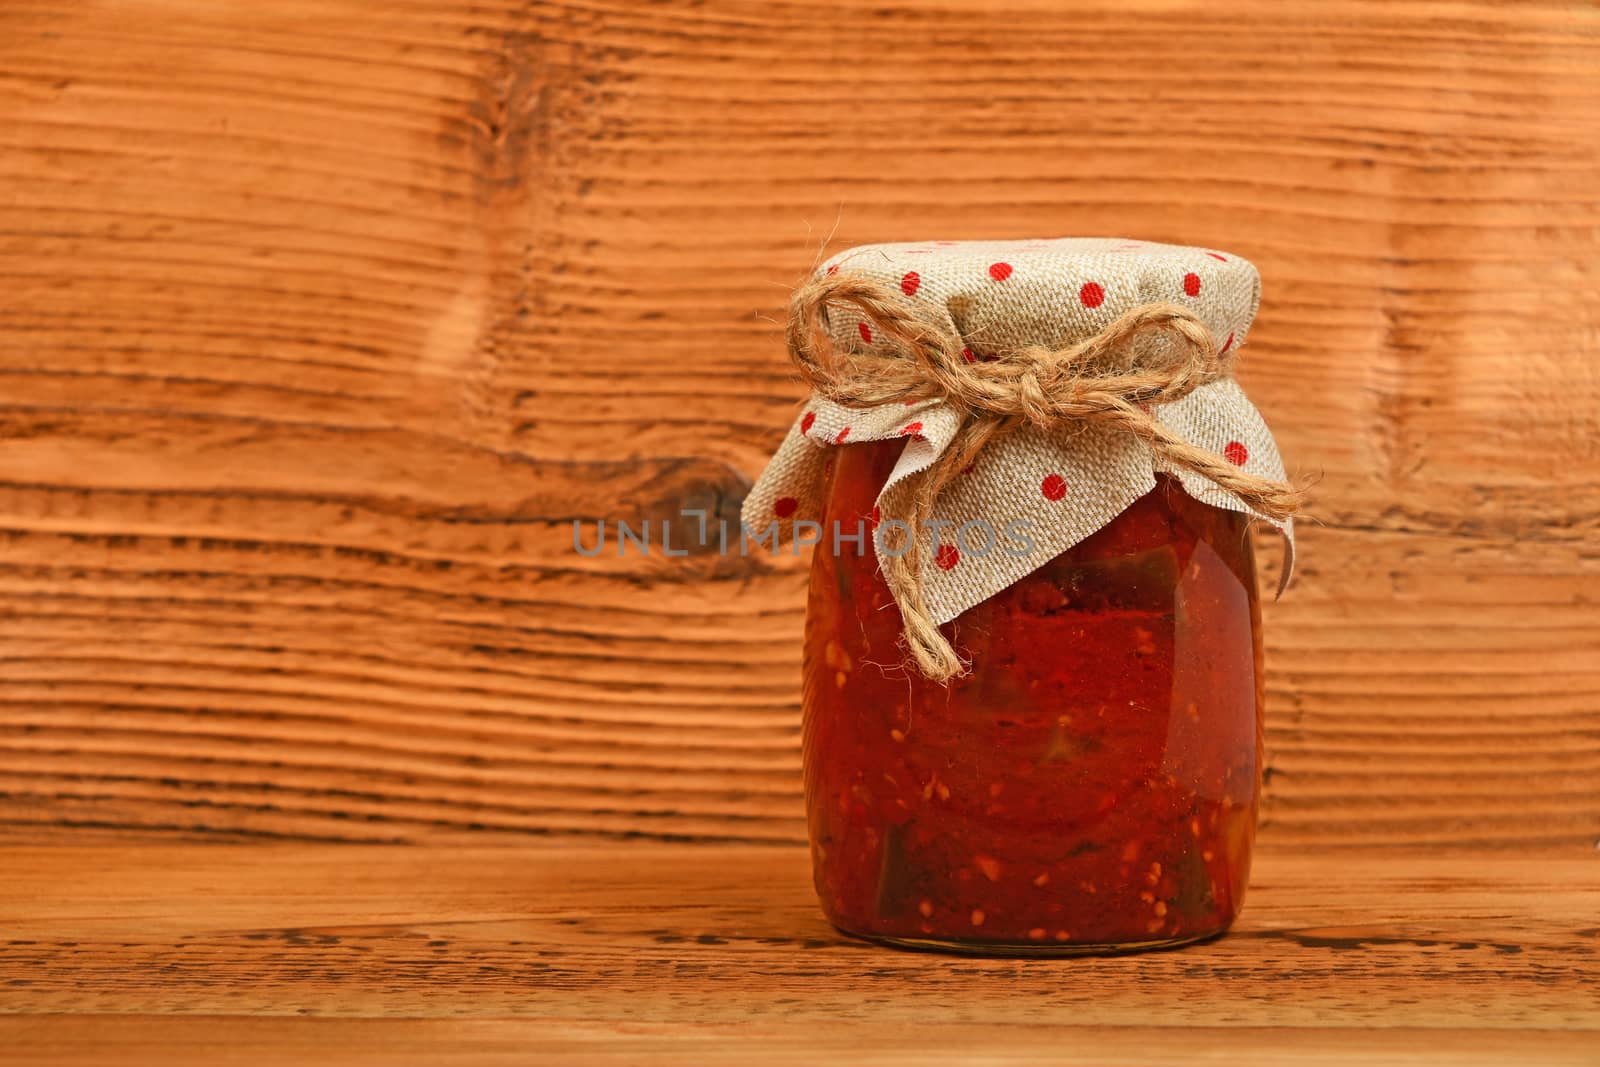 One glass jar of homemade pickled pepper, paprika and eggplant salad with dotted textile top decoration at brown vintage wooden surface